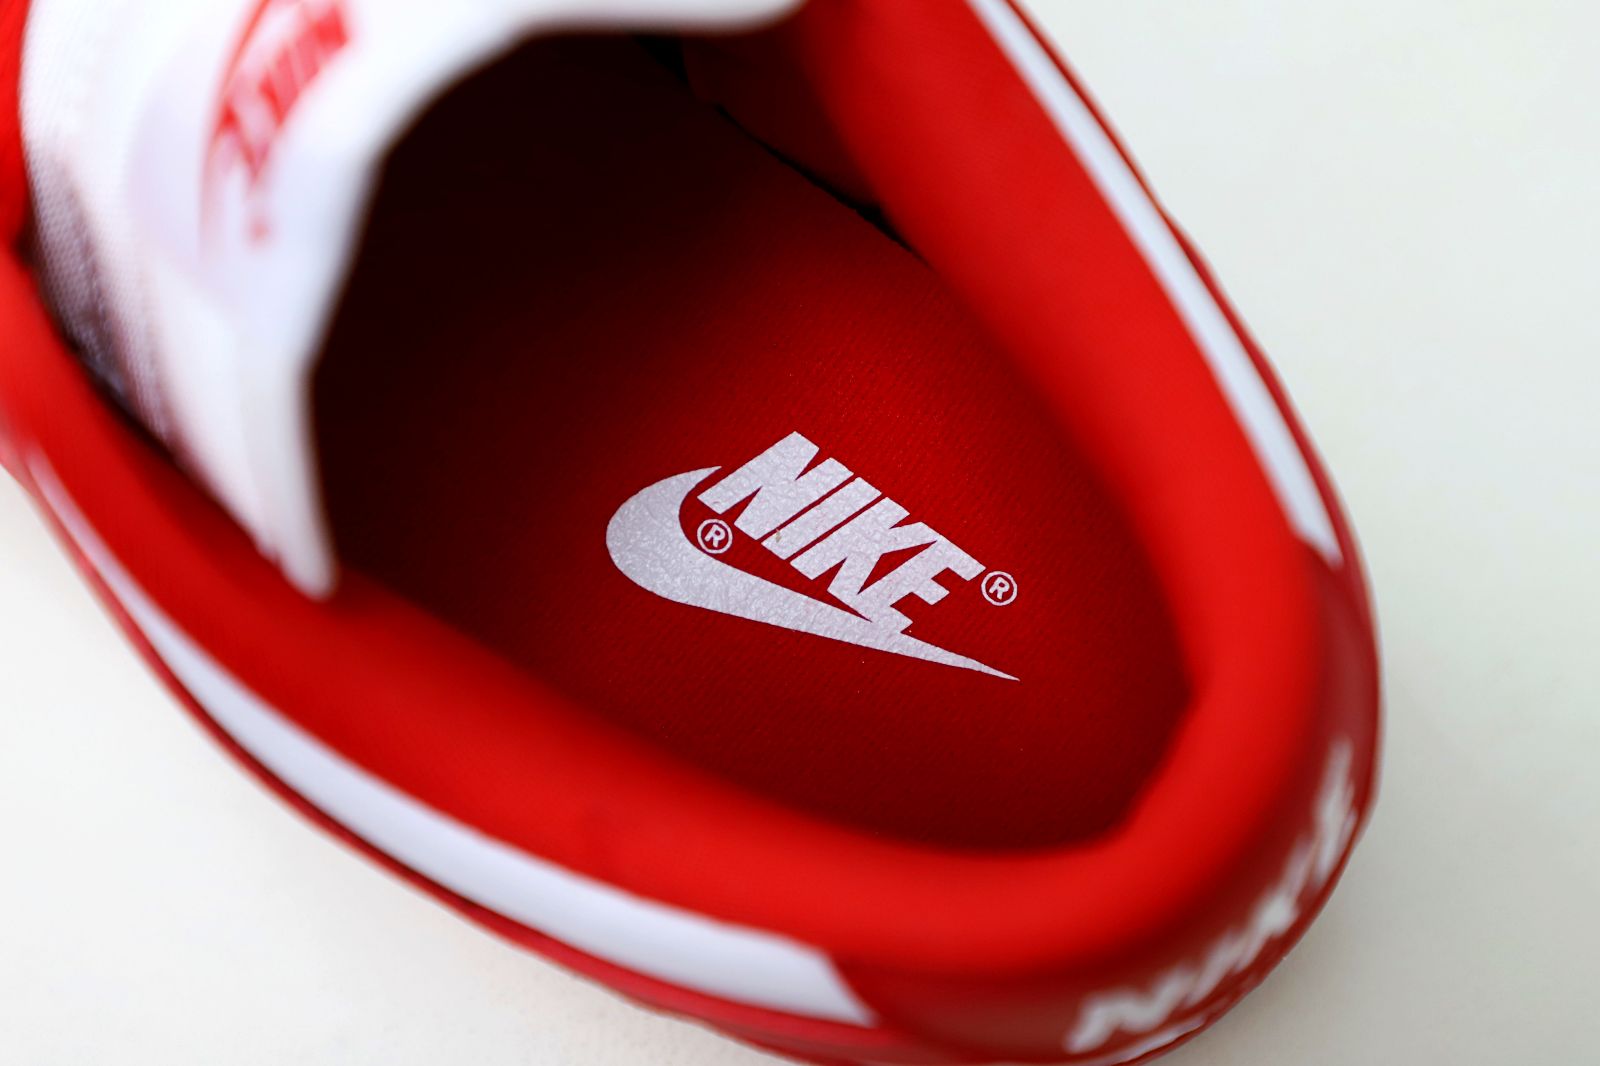 DUNK LOW SP RED